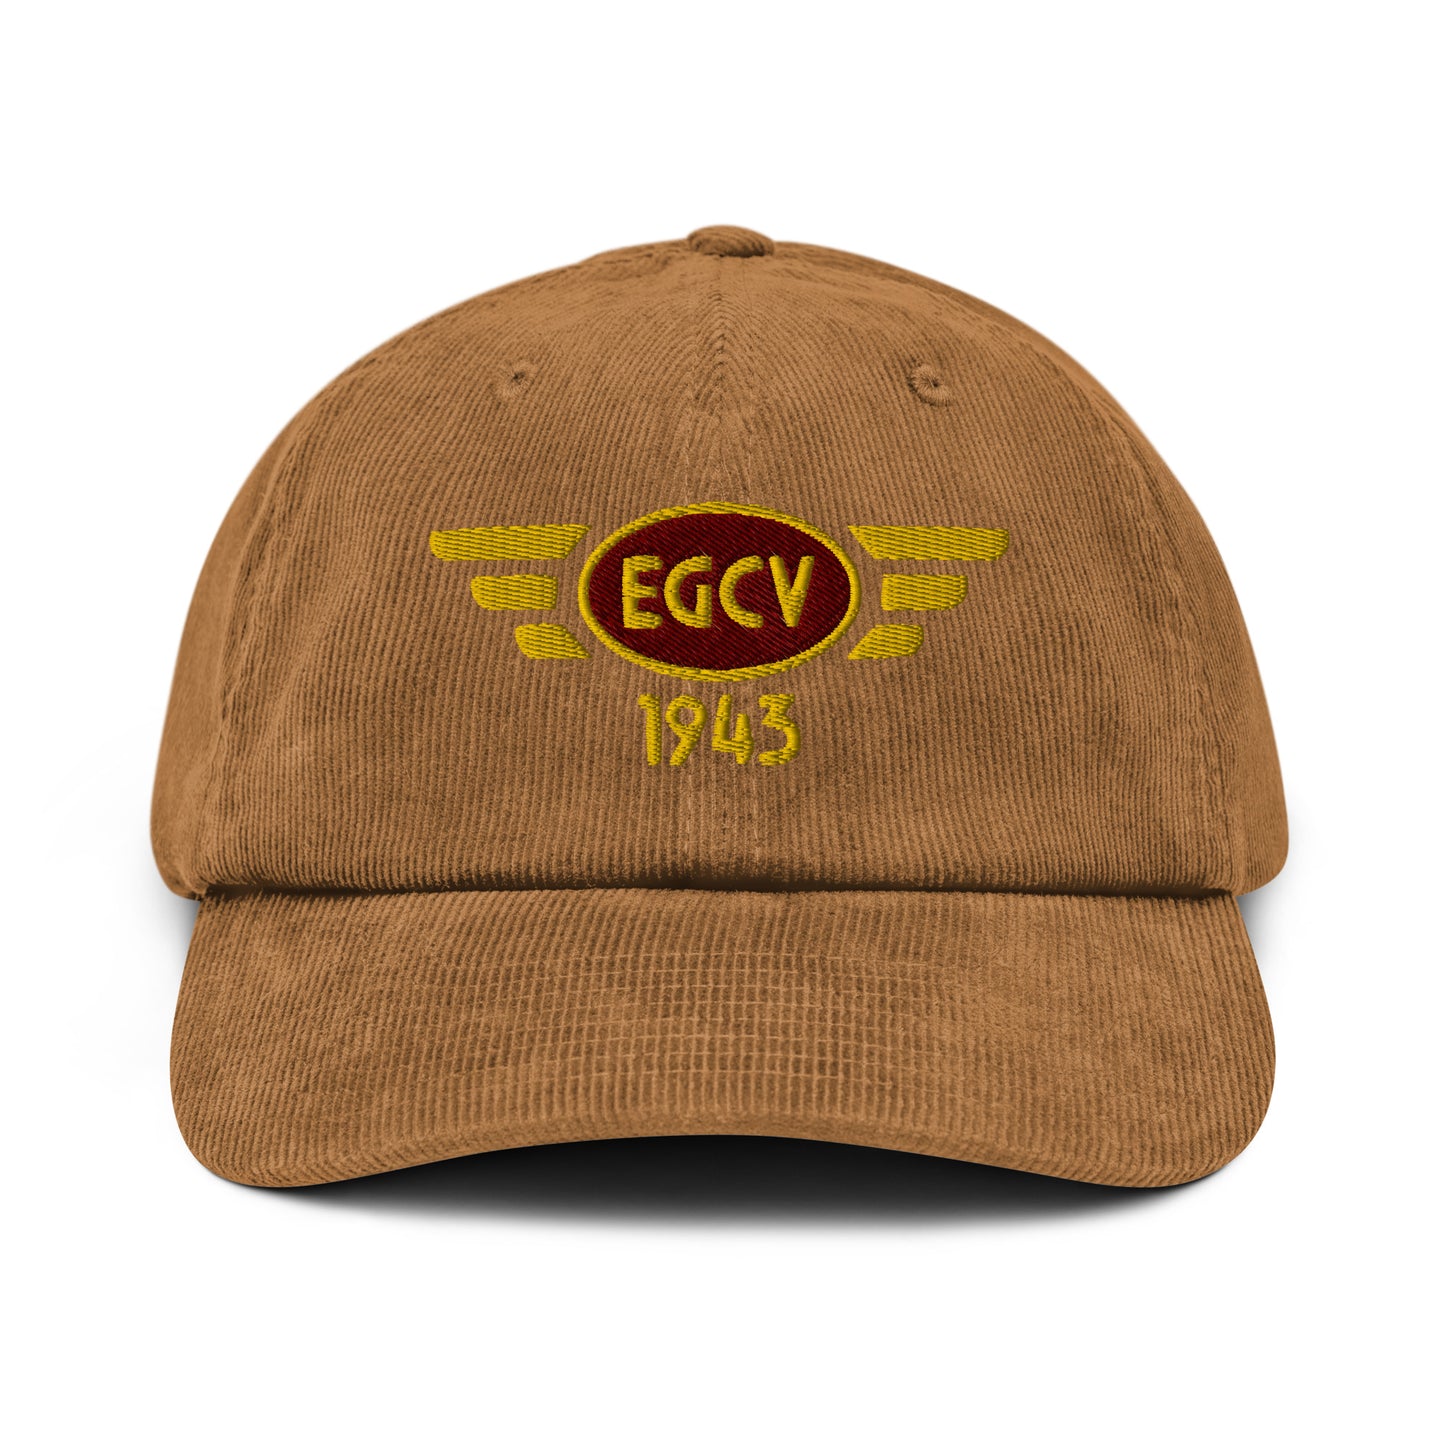 Sleap Airfield corduroy cap with embroidered ICAO code.